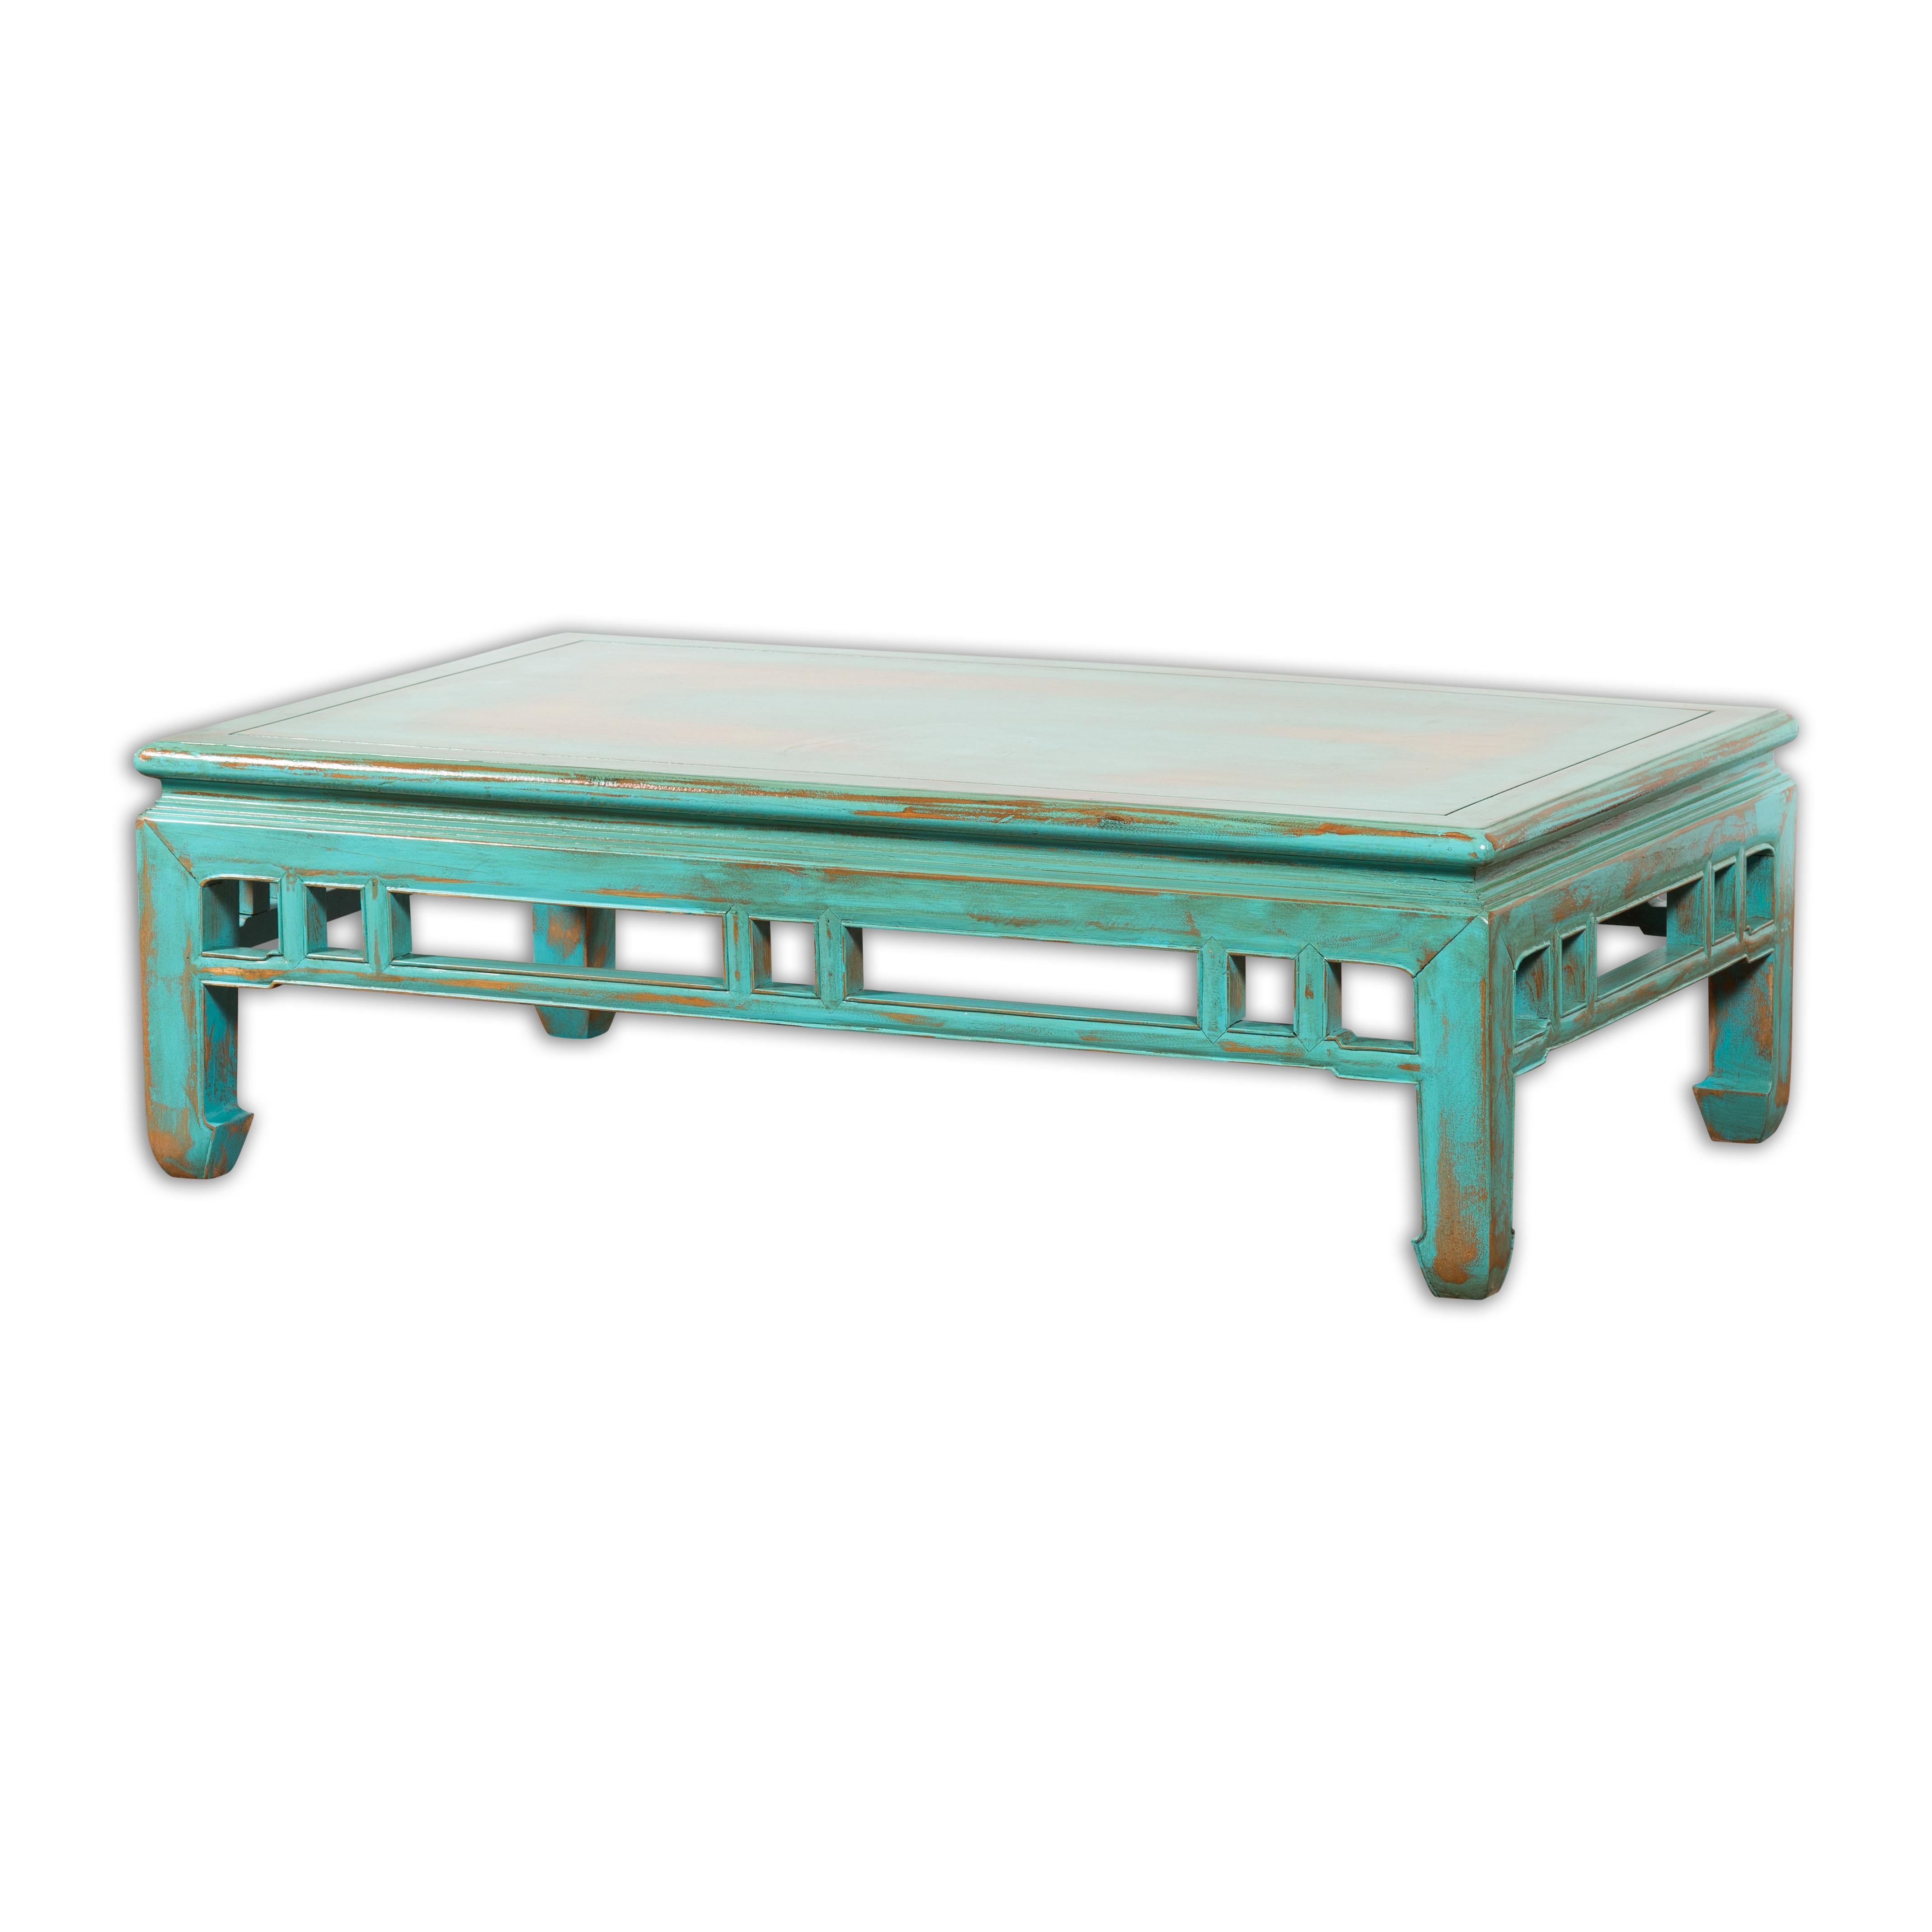 Chinese Qing Dynasty Low Kang Coffee Table with Custom Aqua Teal Lacquer For Sale 12